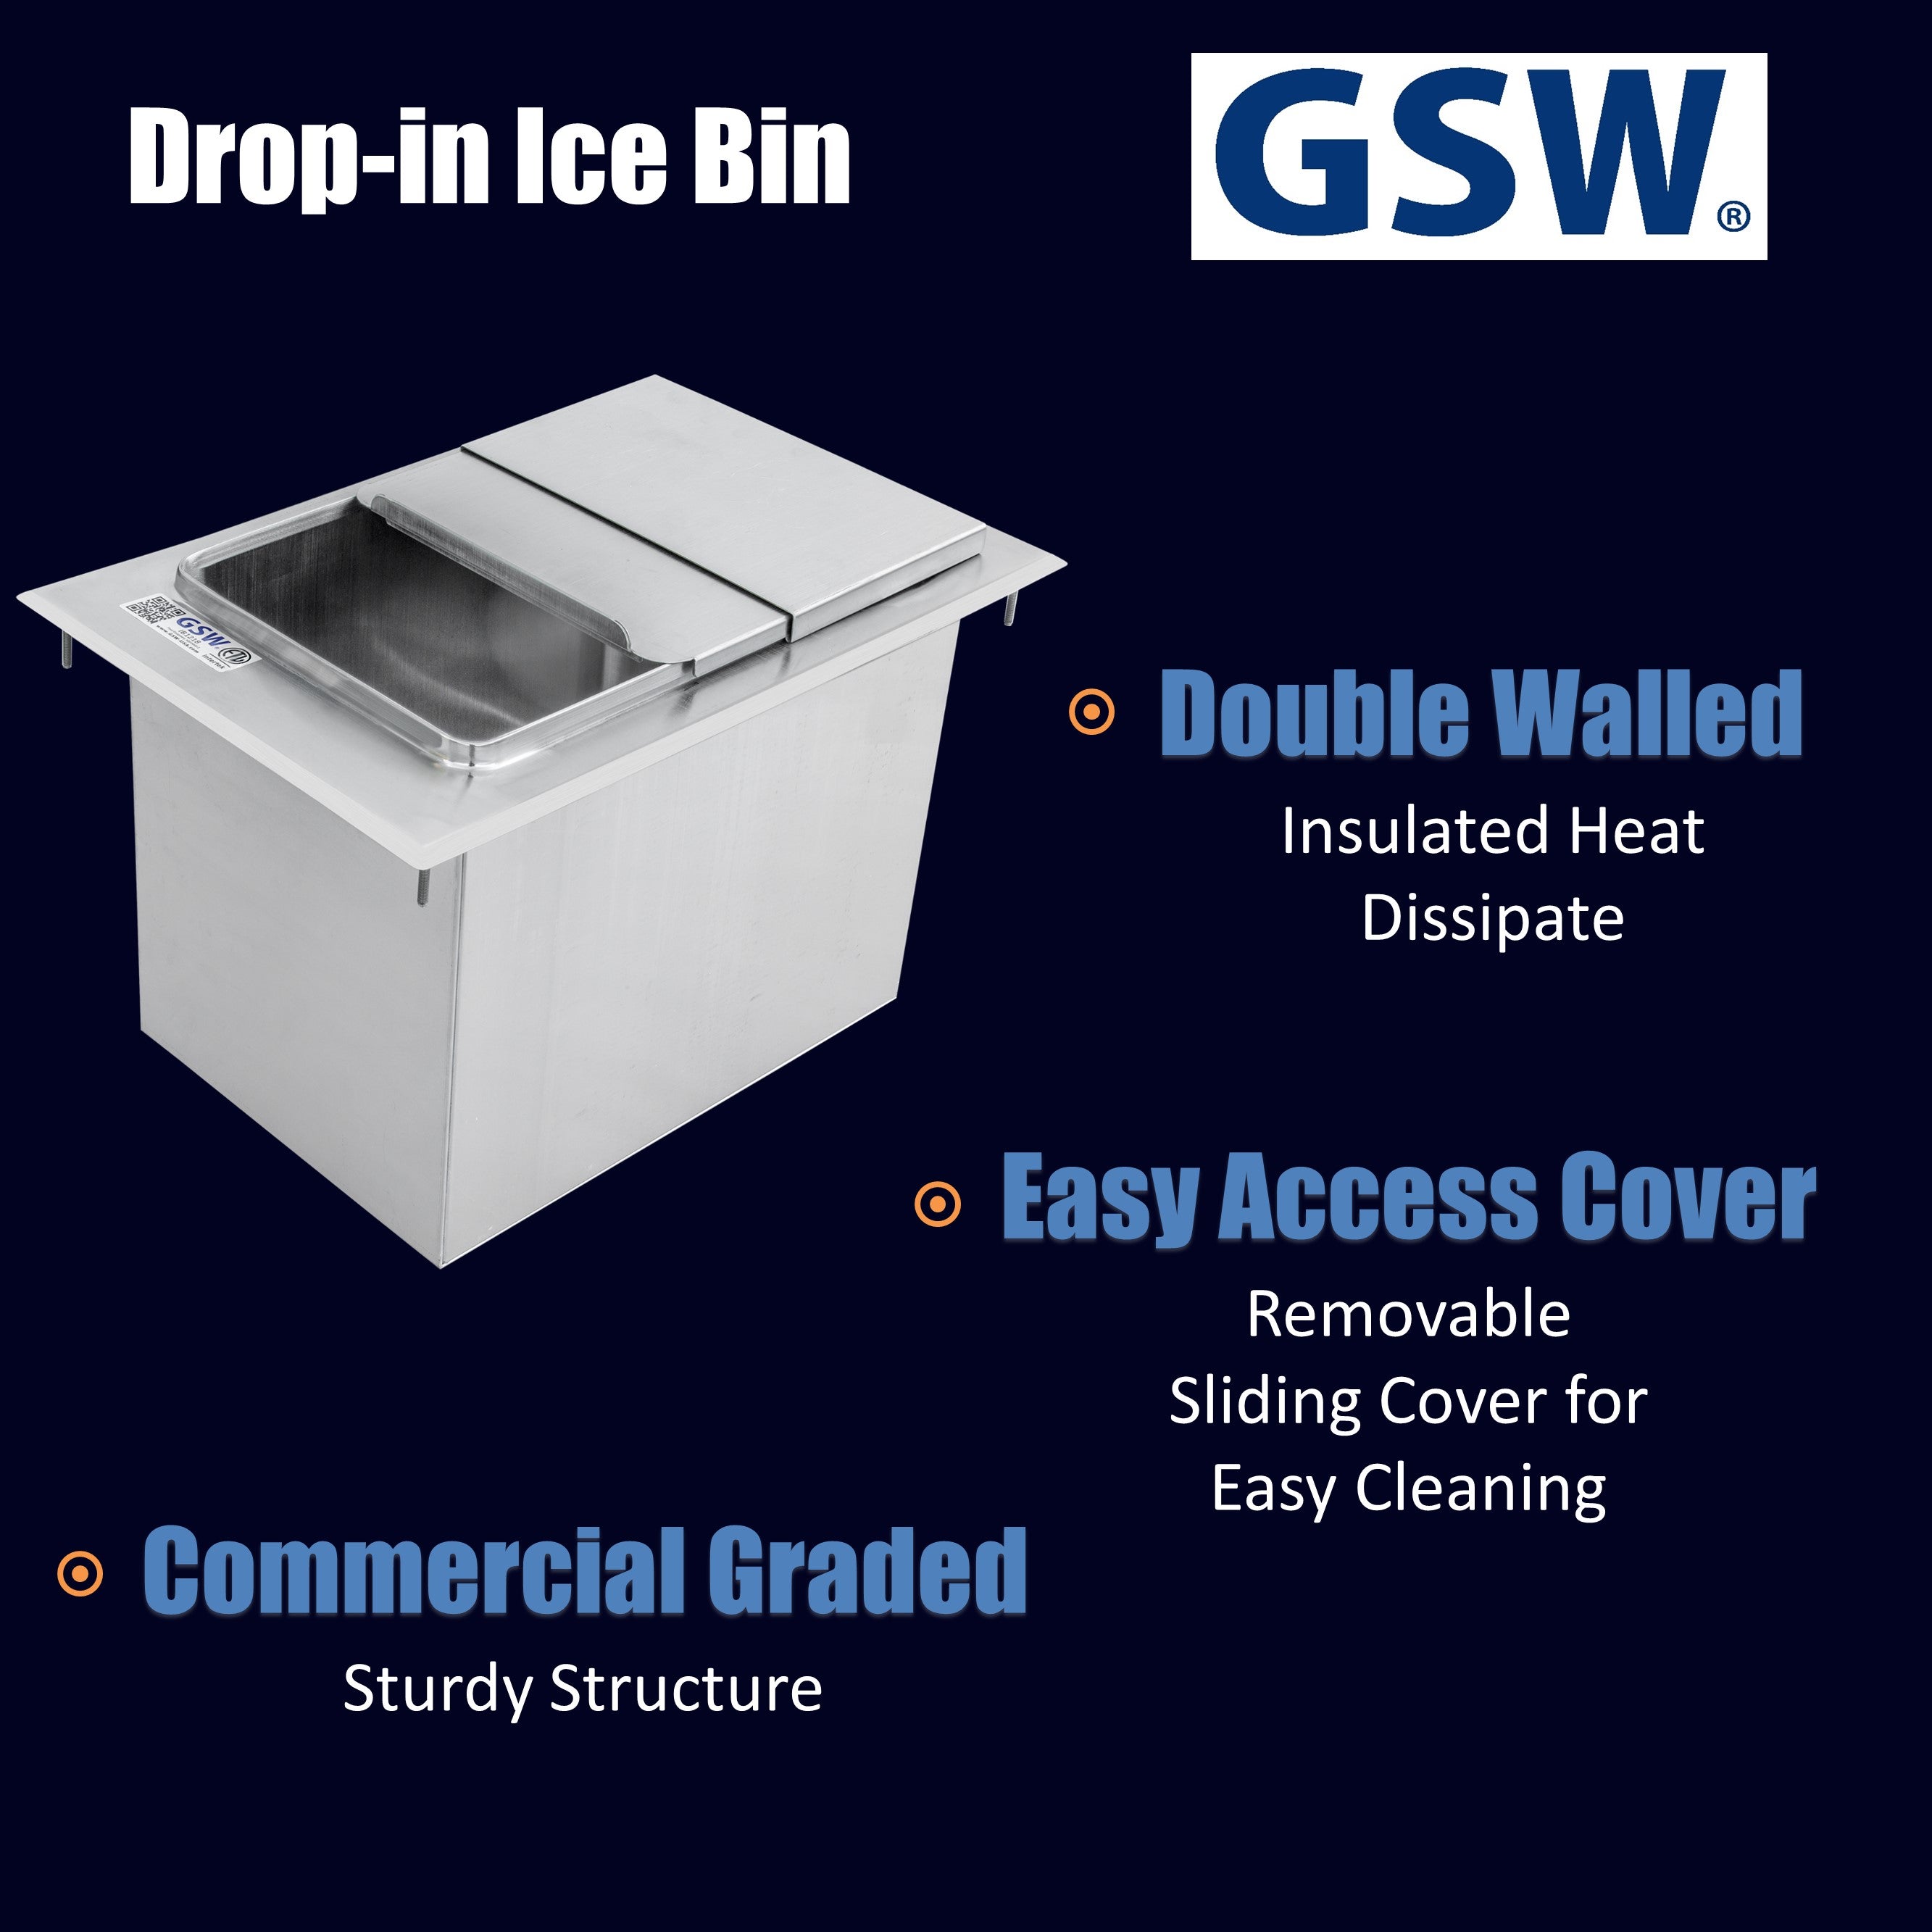 GSW IB1218 Stainless Steel Drop-In Ice Bin 18”D x 12”W x 14”H with Removable Sliding Cover, 9” x 14” Double Walled Ice Bin with 1” NPT Drain, for Storing Ice Cold Wine Beer